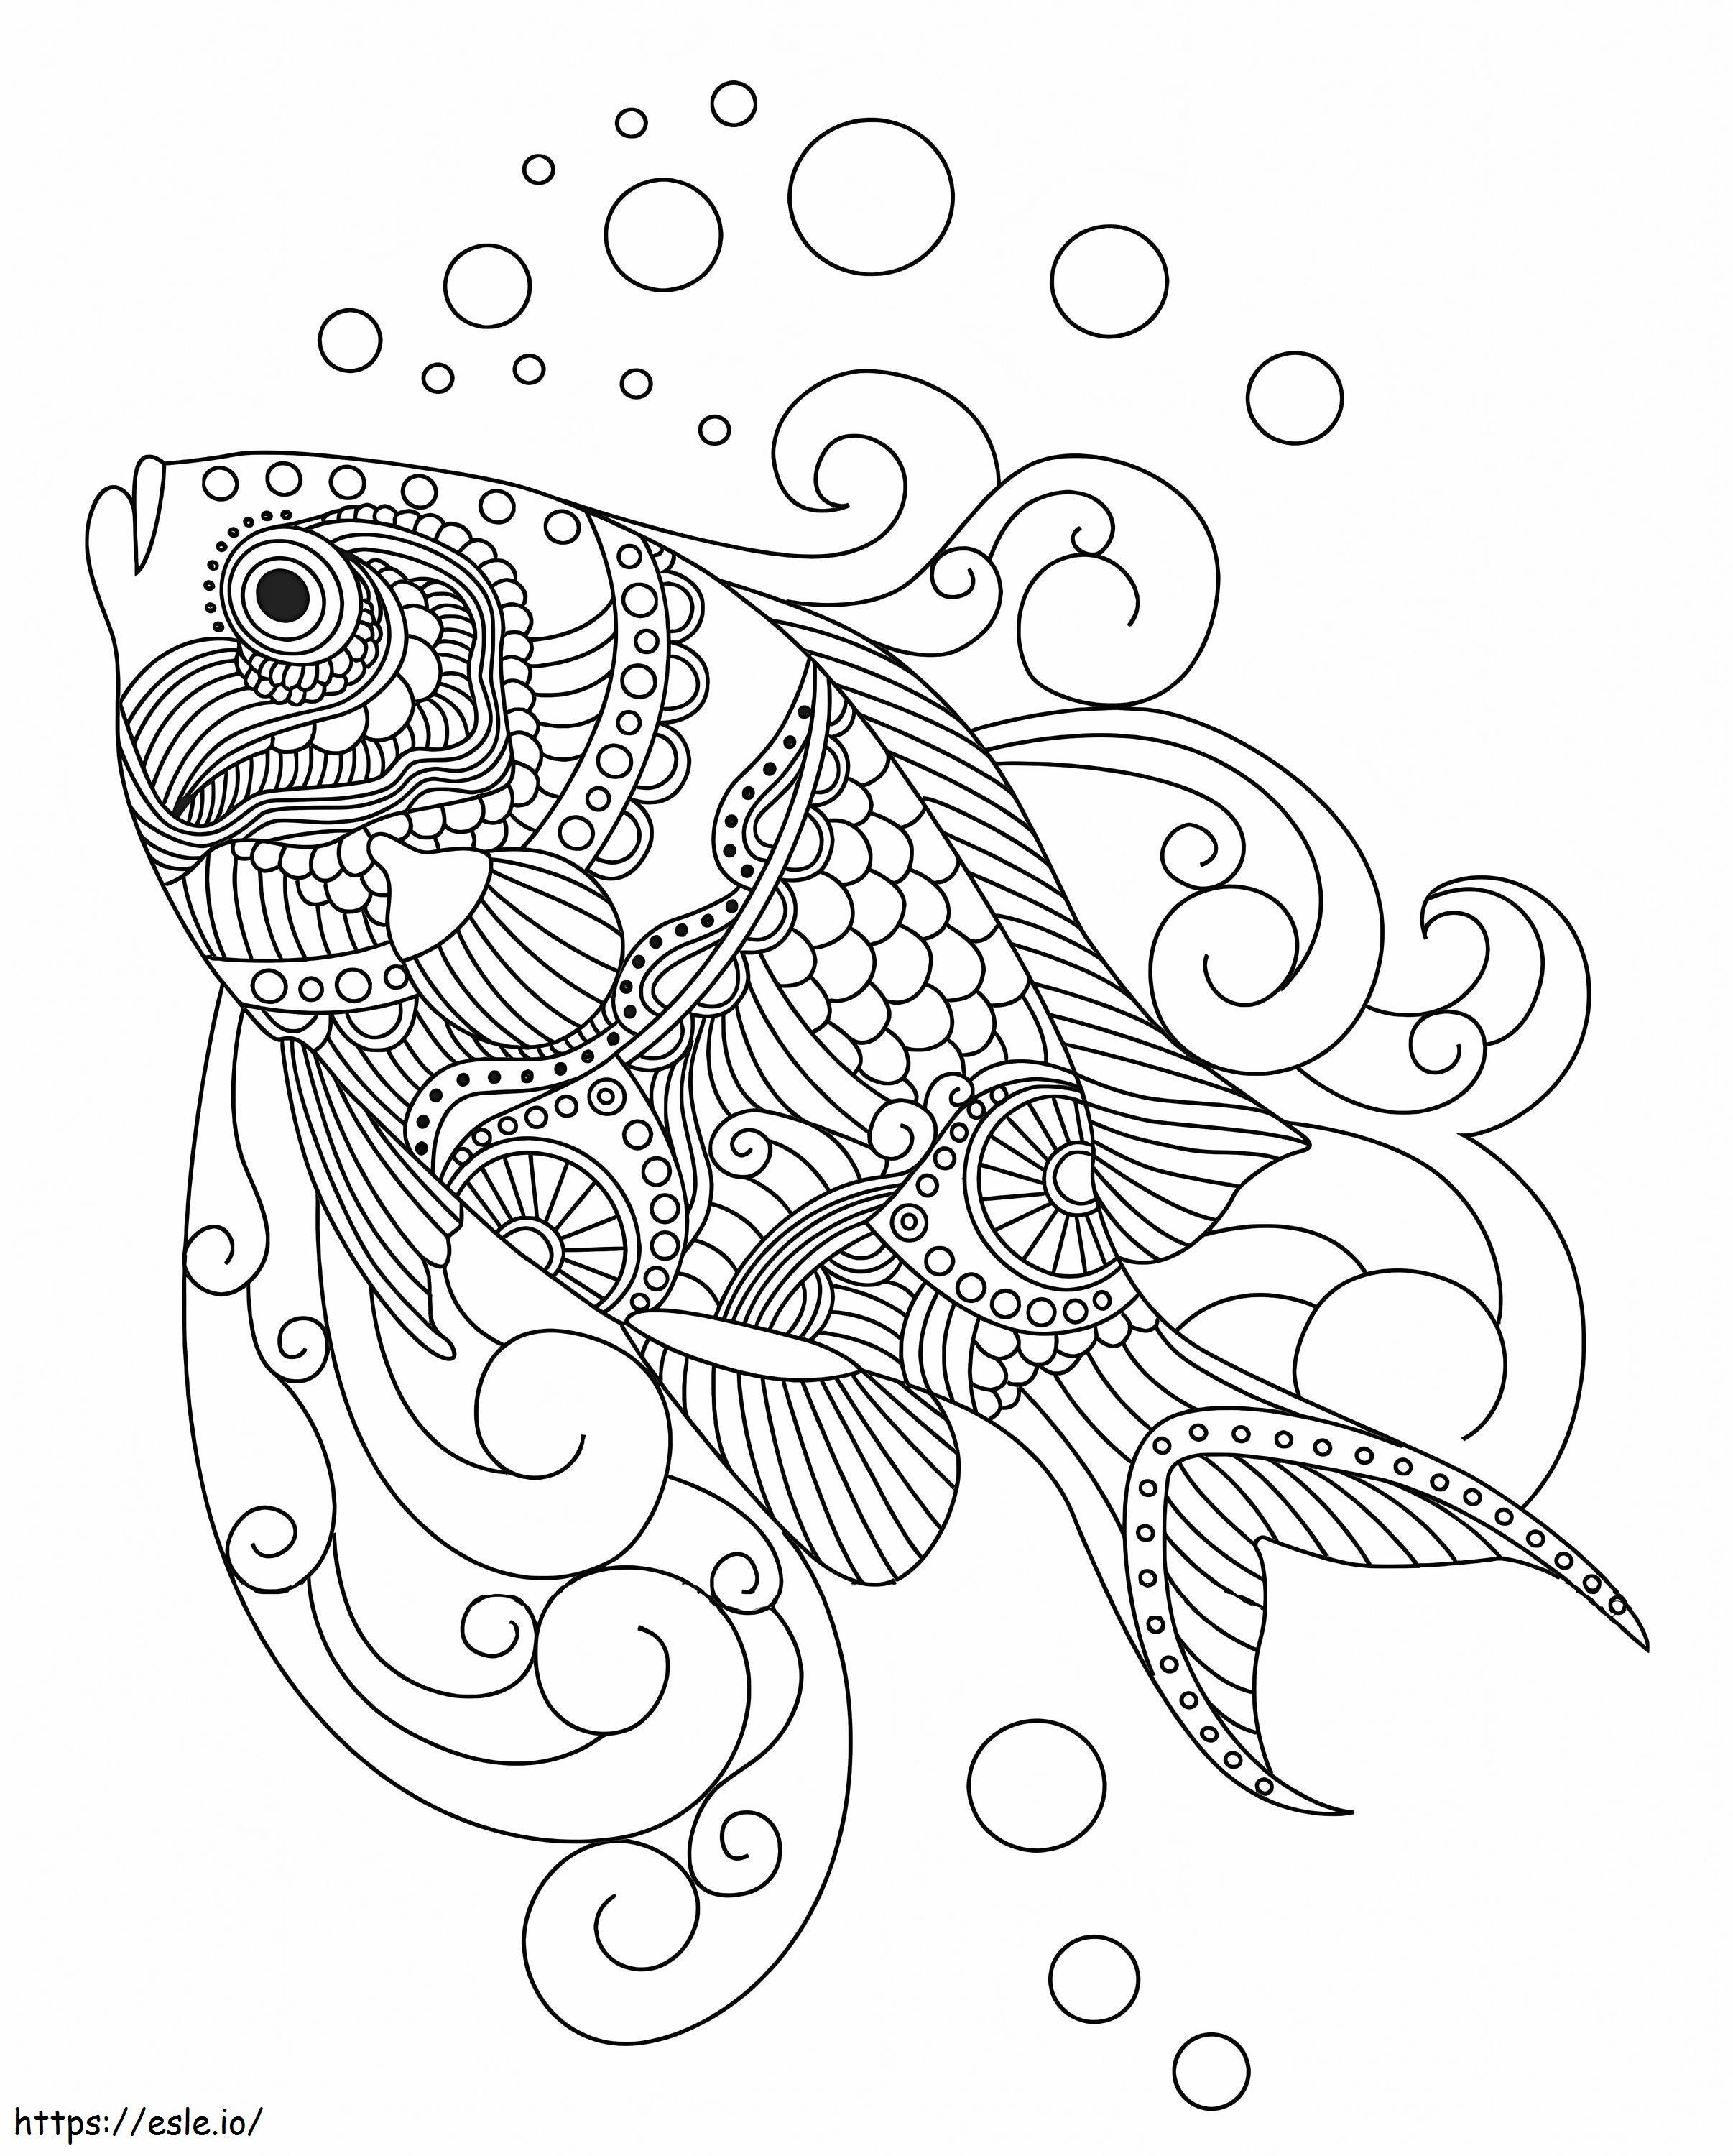 Fish Is For Adults coloring page